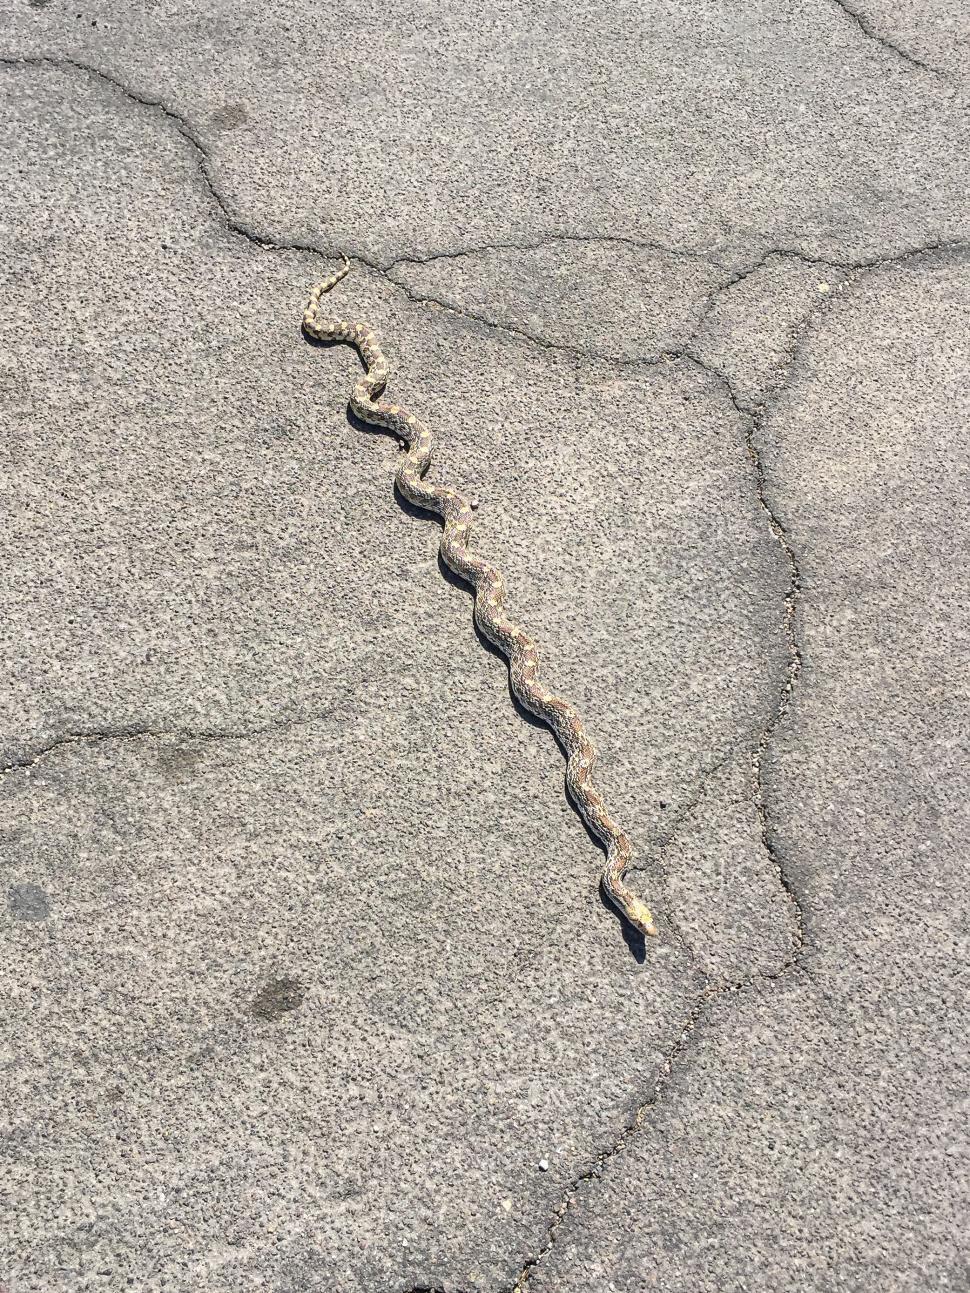 Free Image of Snake in the Road 